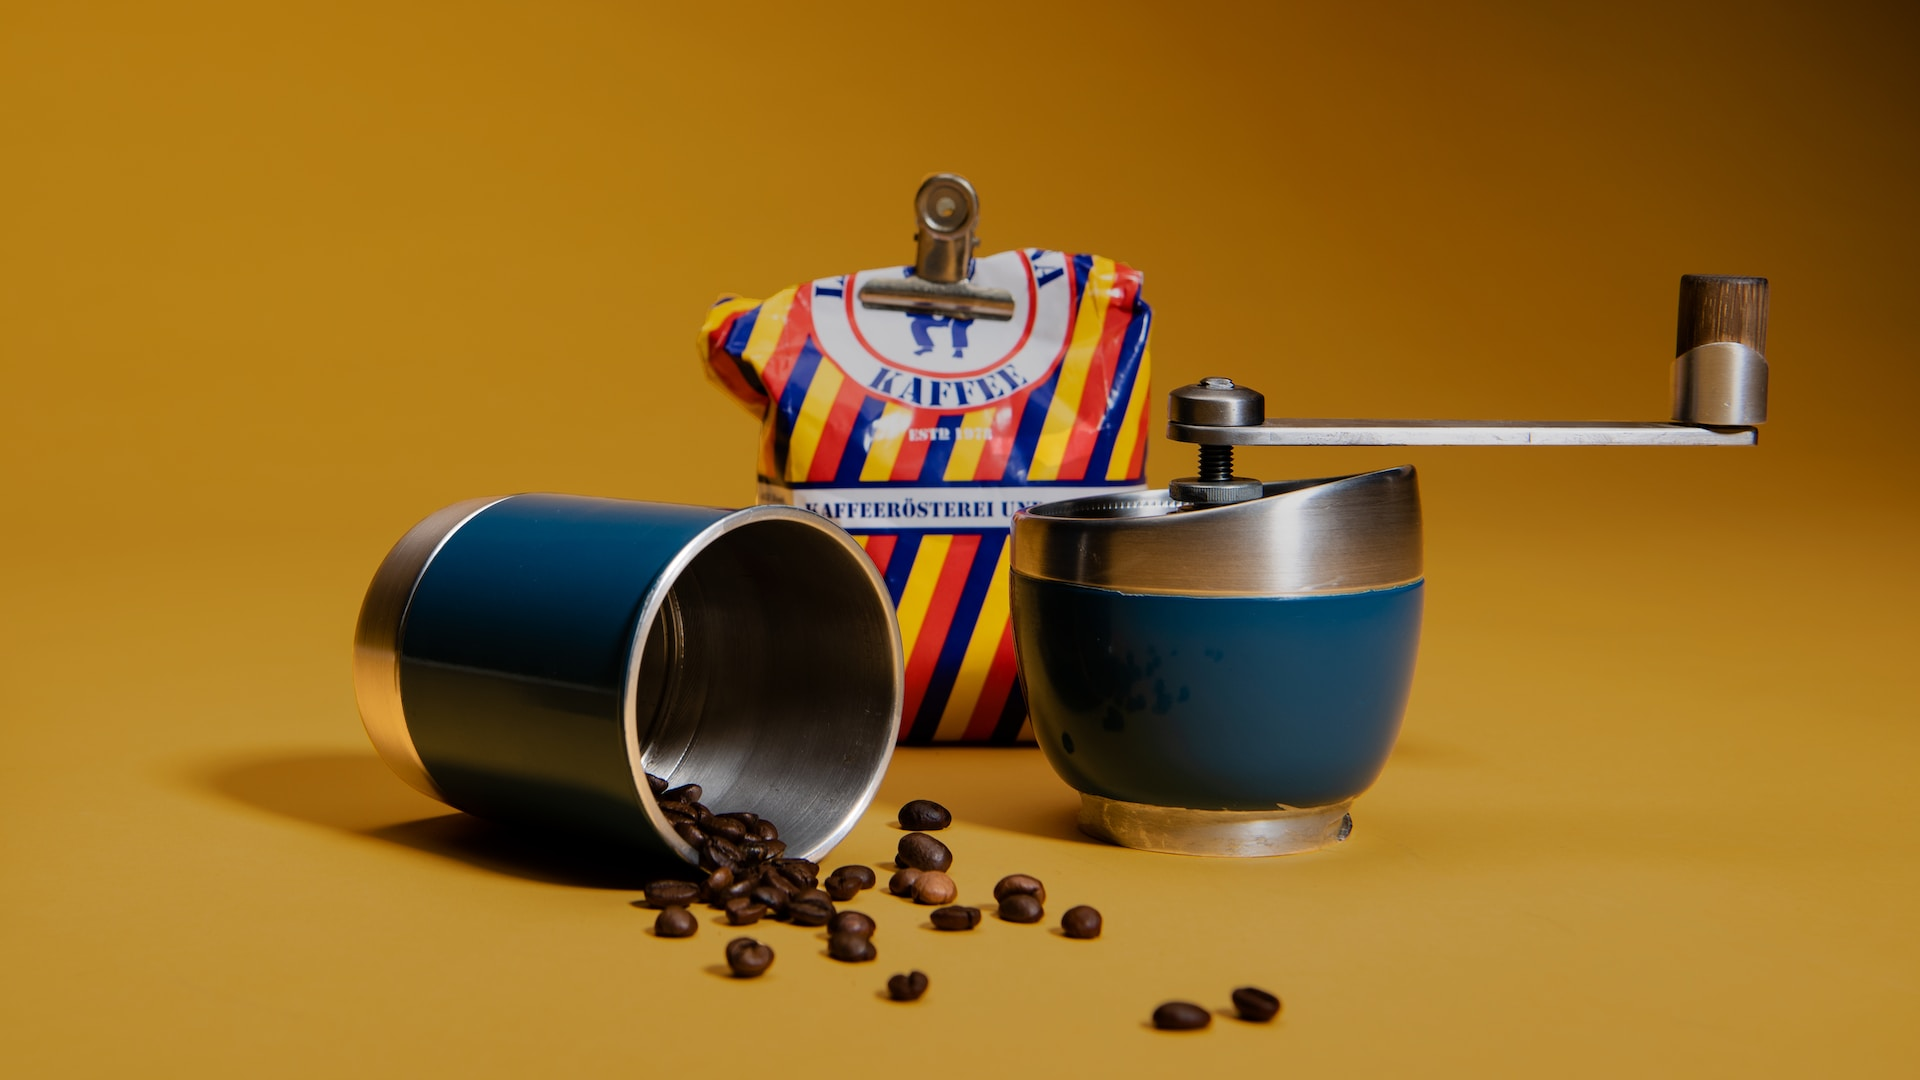 A small, blue handheld coffee grinder tipped over with coffee beans coming out of it